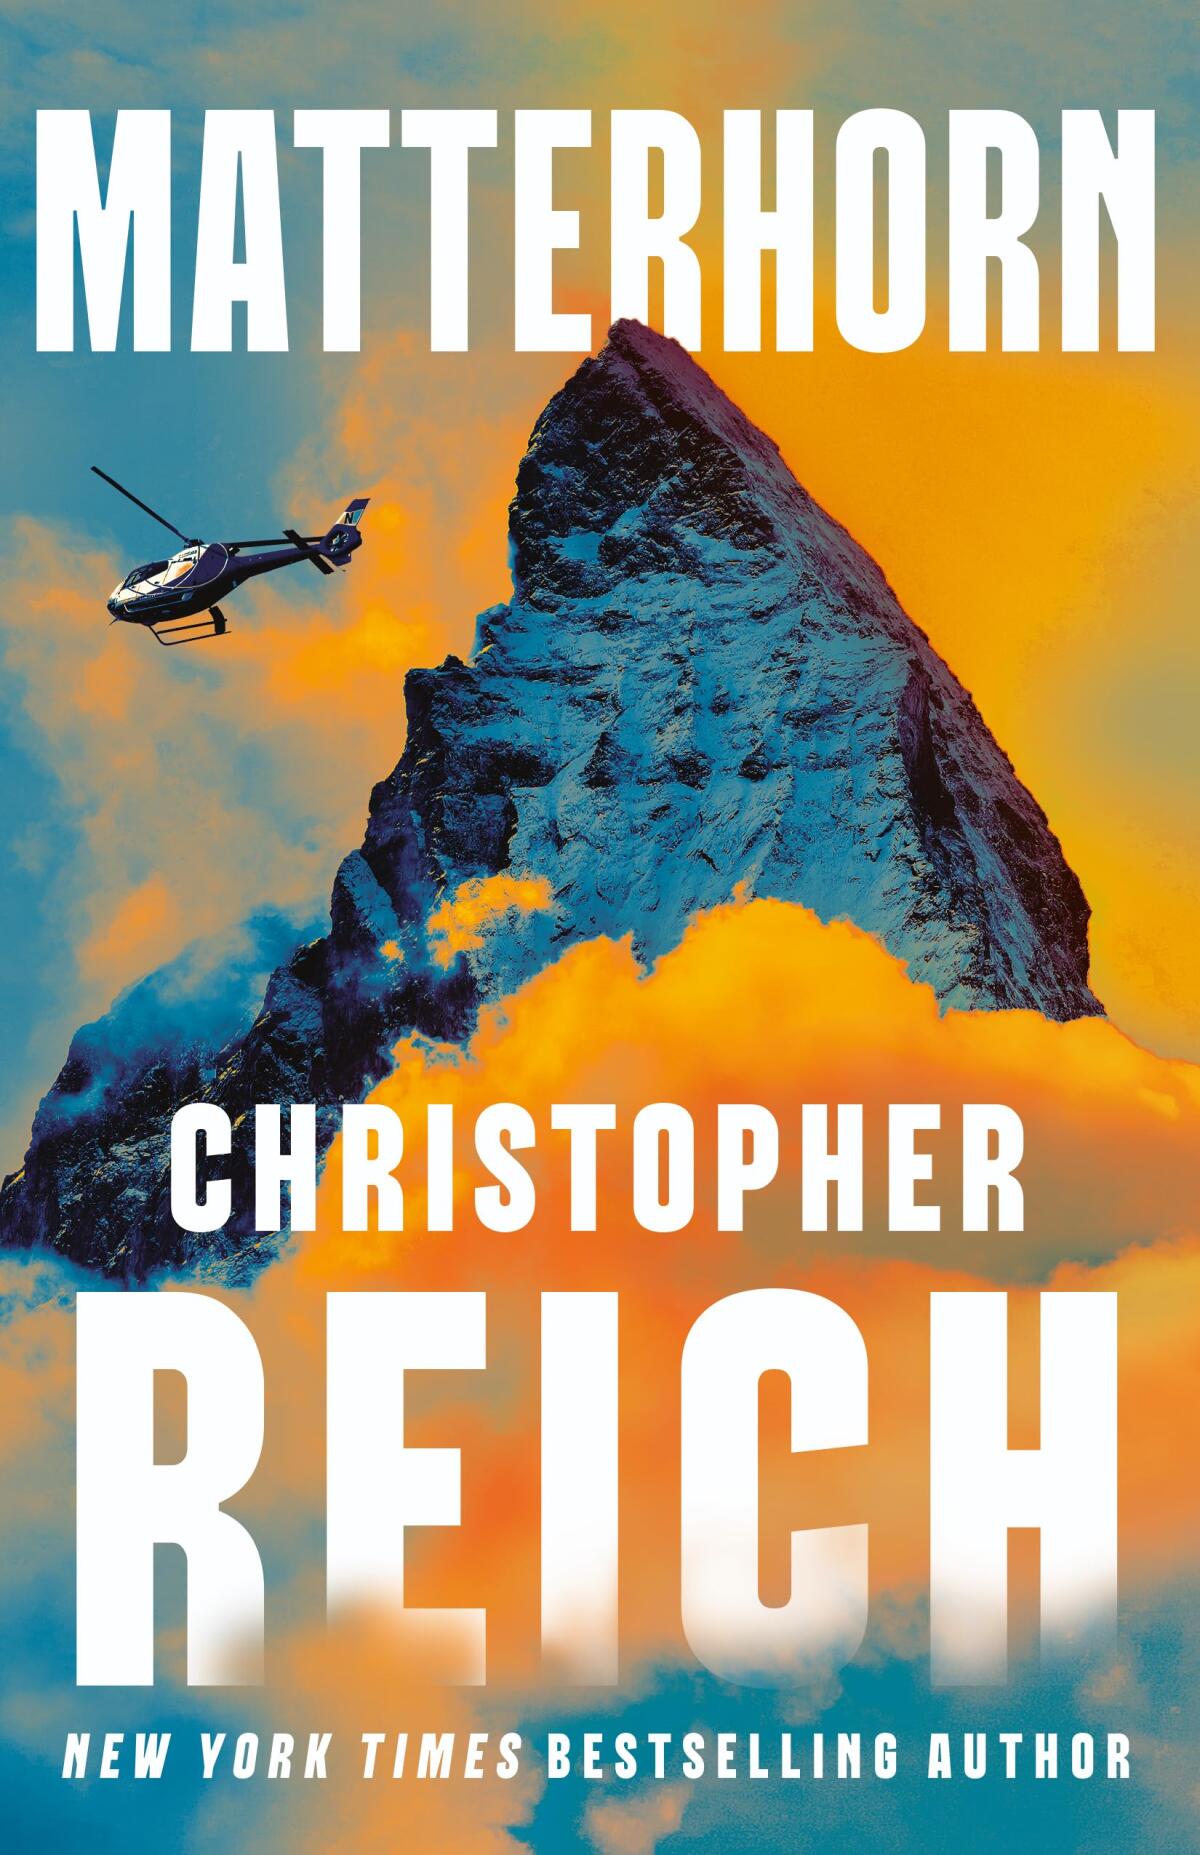 Book cover for "Matterhorn" by Christopher Reich.